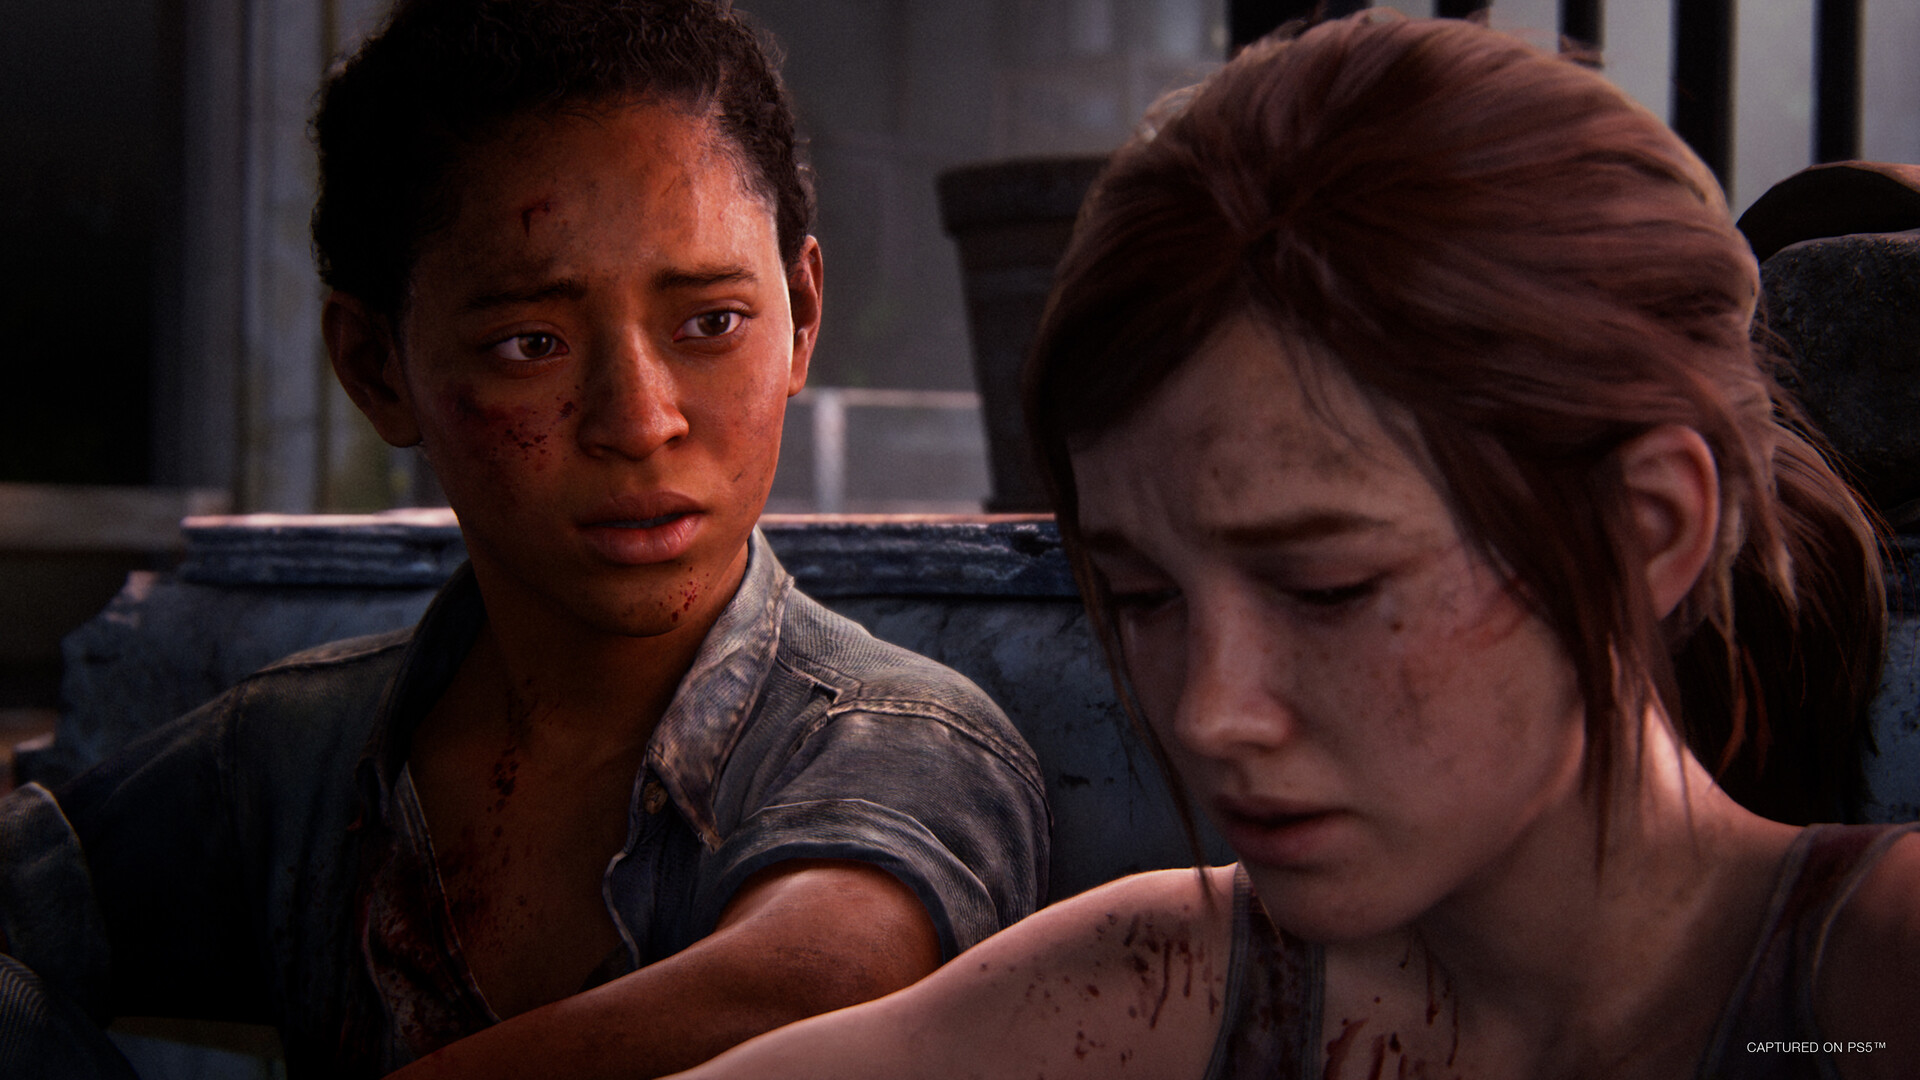 The Last of Us PC Steam key, Buy TLOU Part I Online